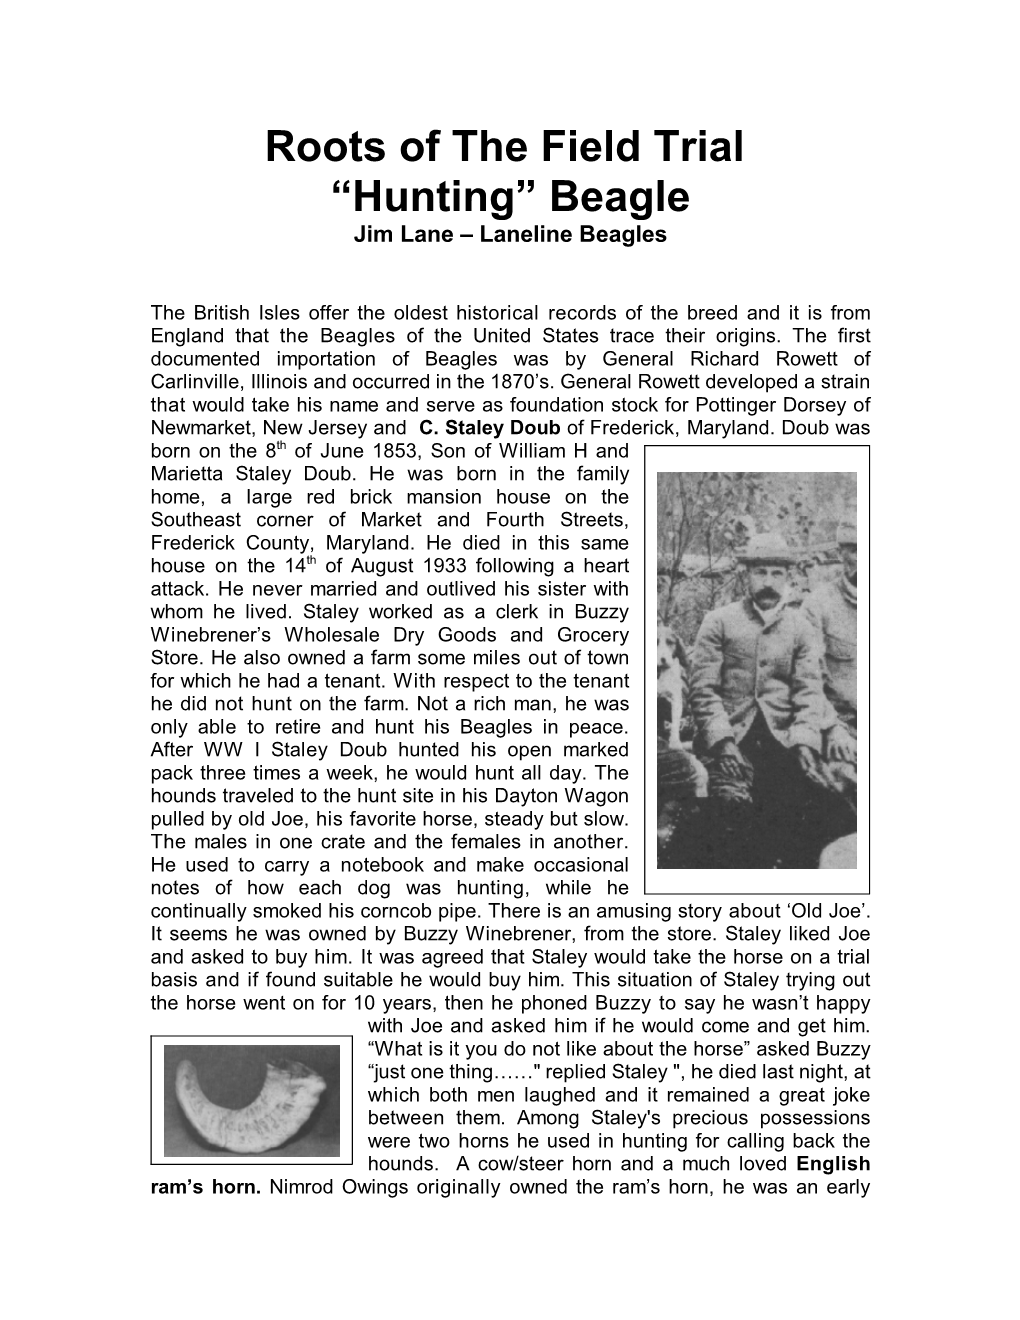 Roots of the Field Trial "Hunting" Beagle